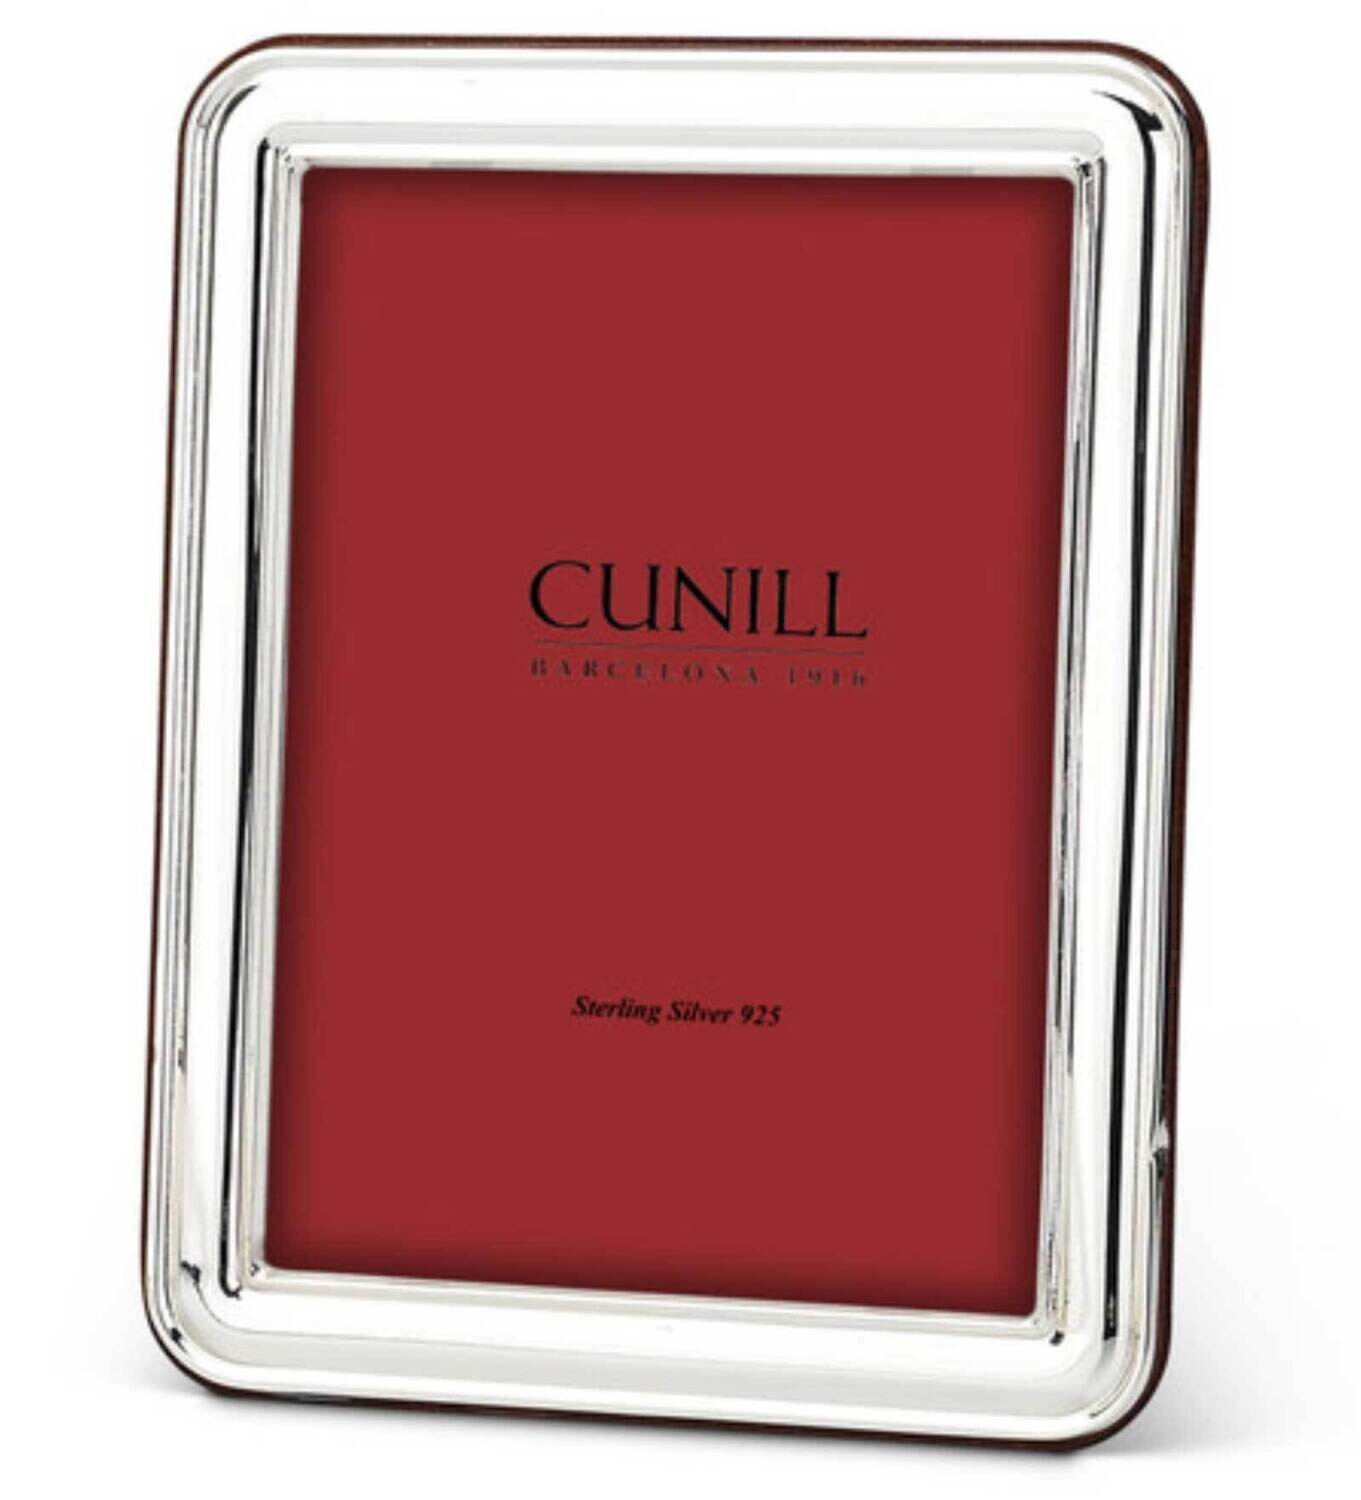 Cunill Addison Plain 8x10 Inch Picture Frame .925 Sterling Silver 84280